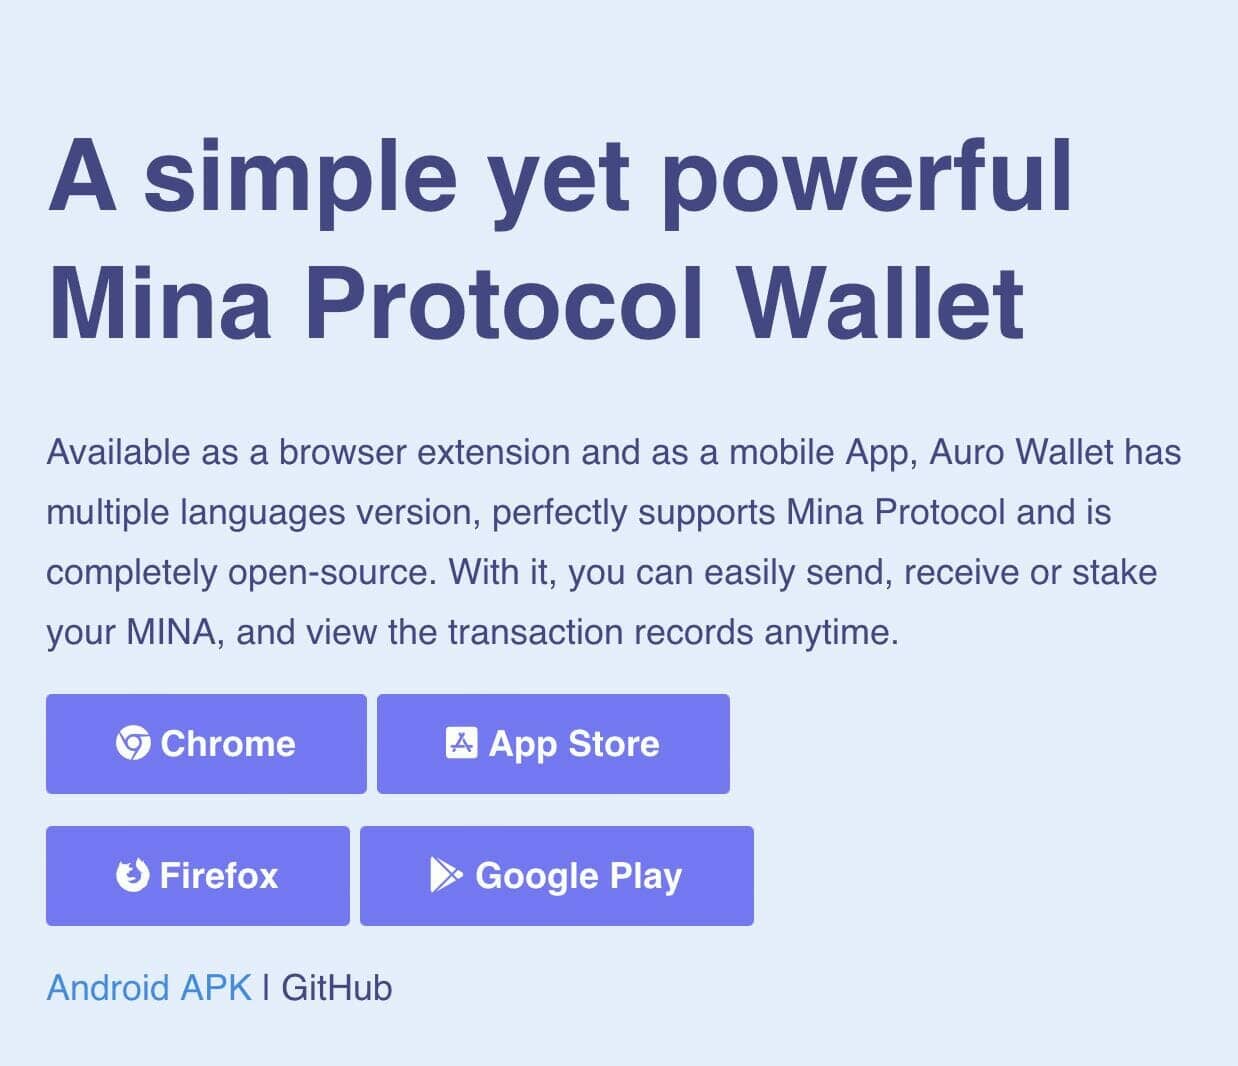 Auro Wallet homepage, for storing and staking your MINA